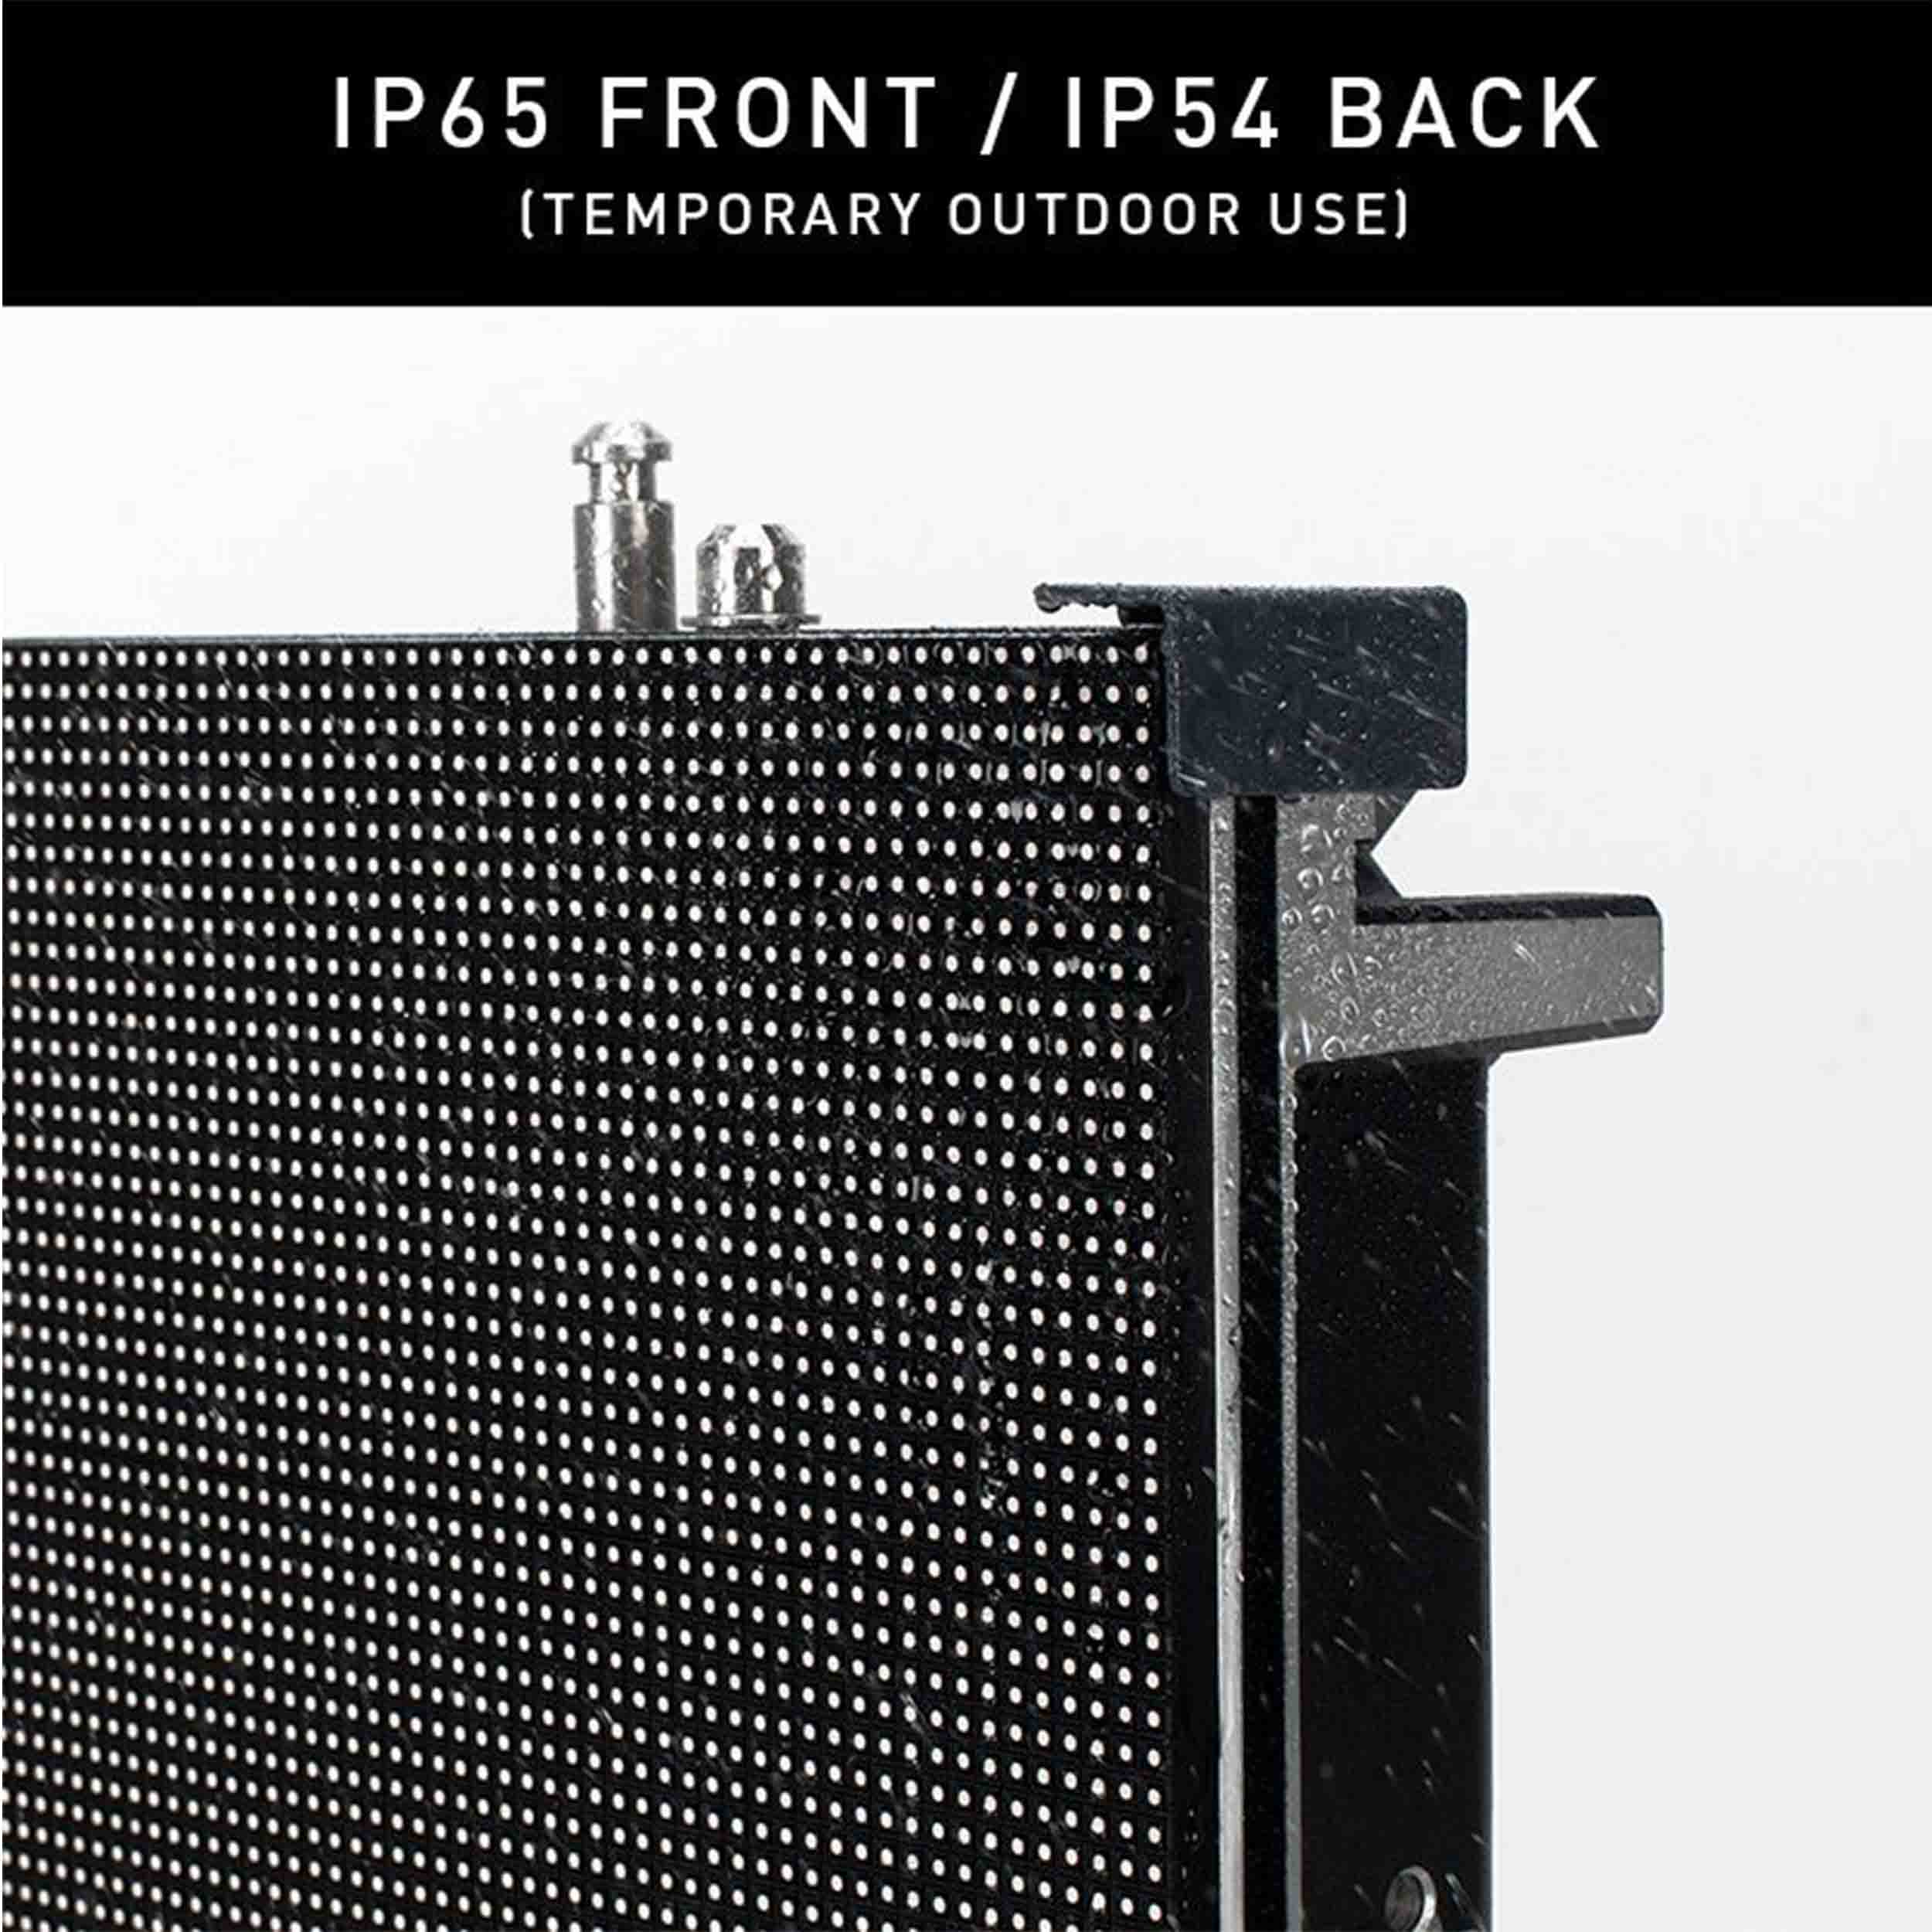 ADJ VS3IP, LED High Resolution Video Panel with IP65 Front and IP54 Rear by ADJ